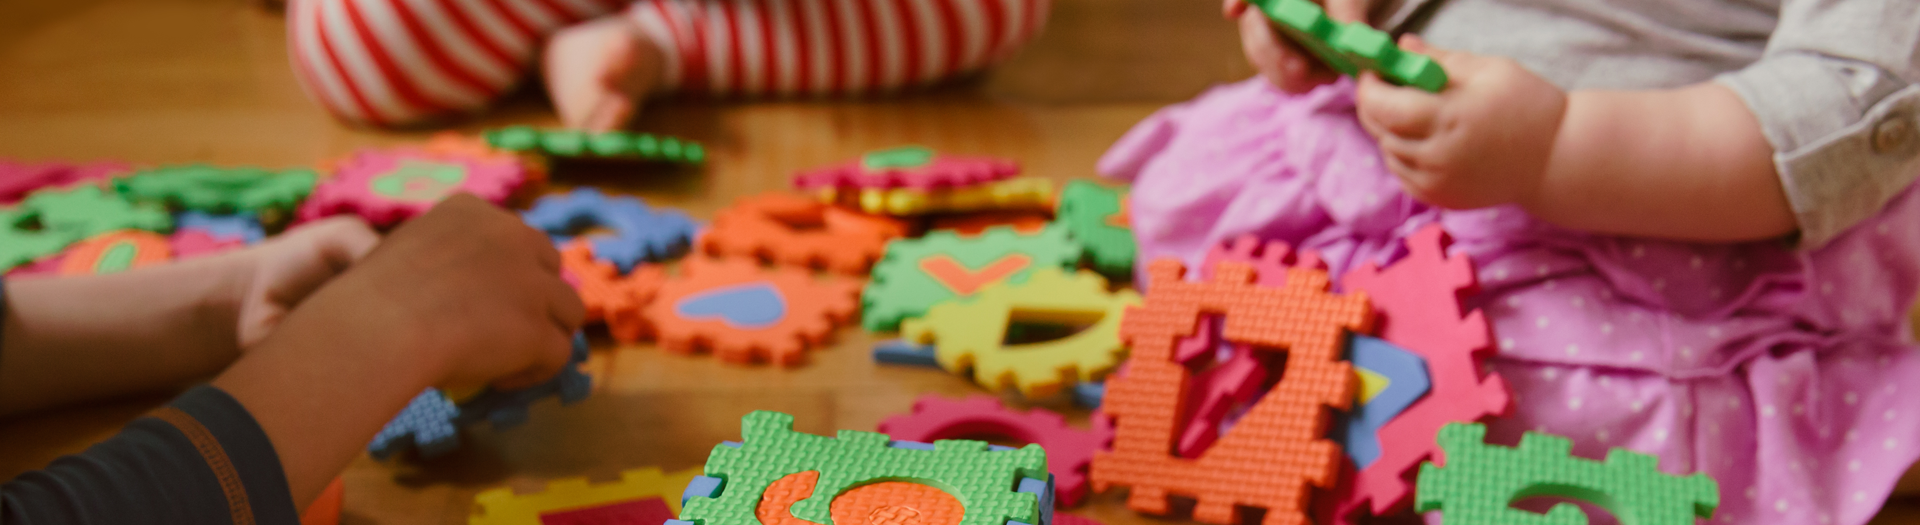 image of child care toys